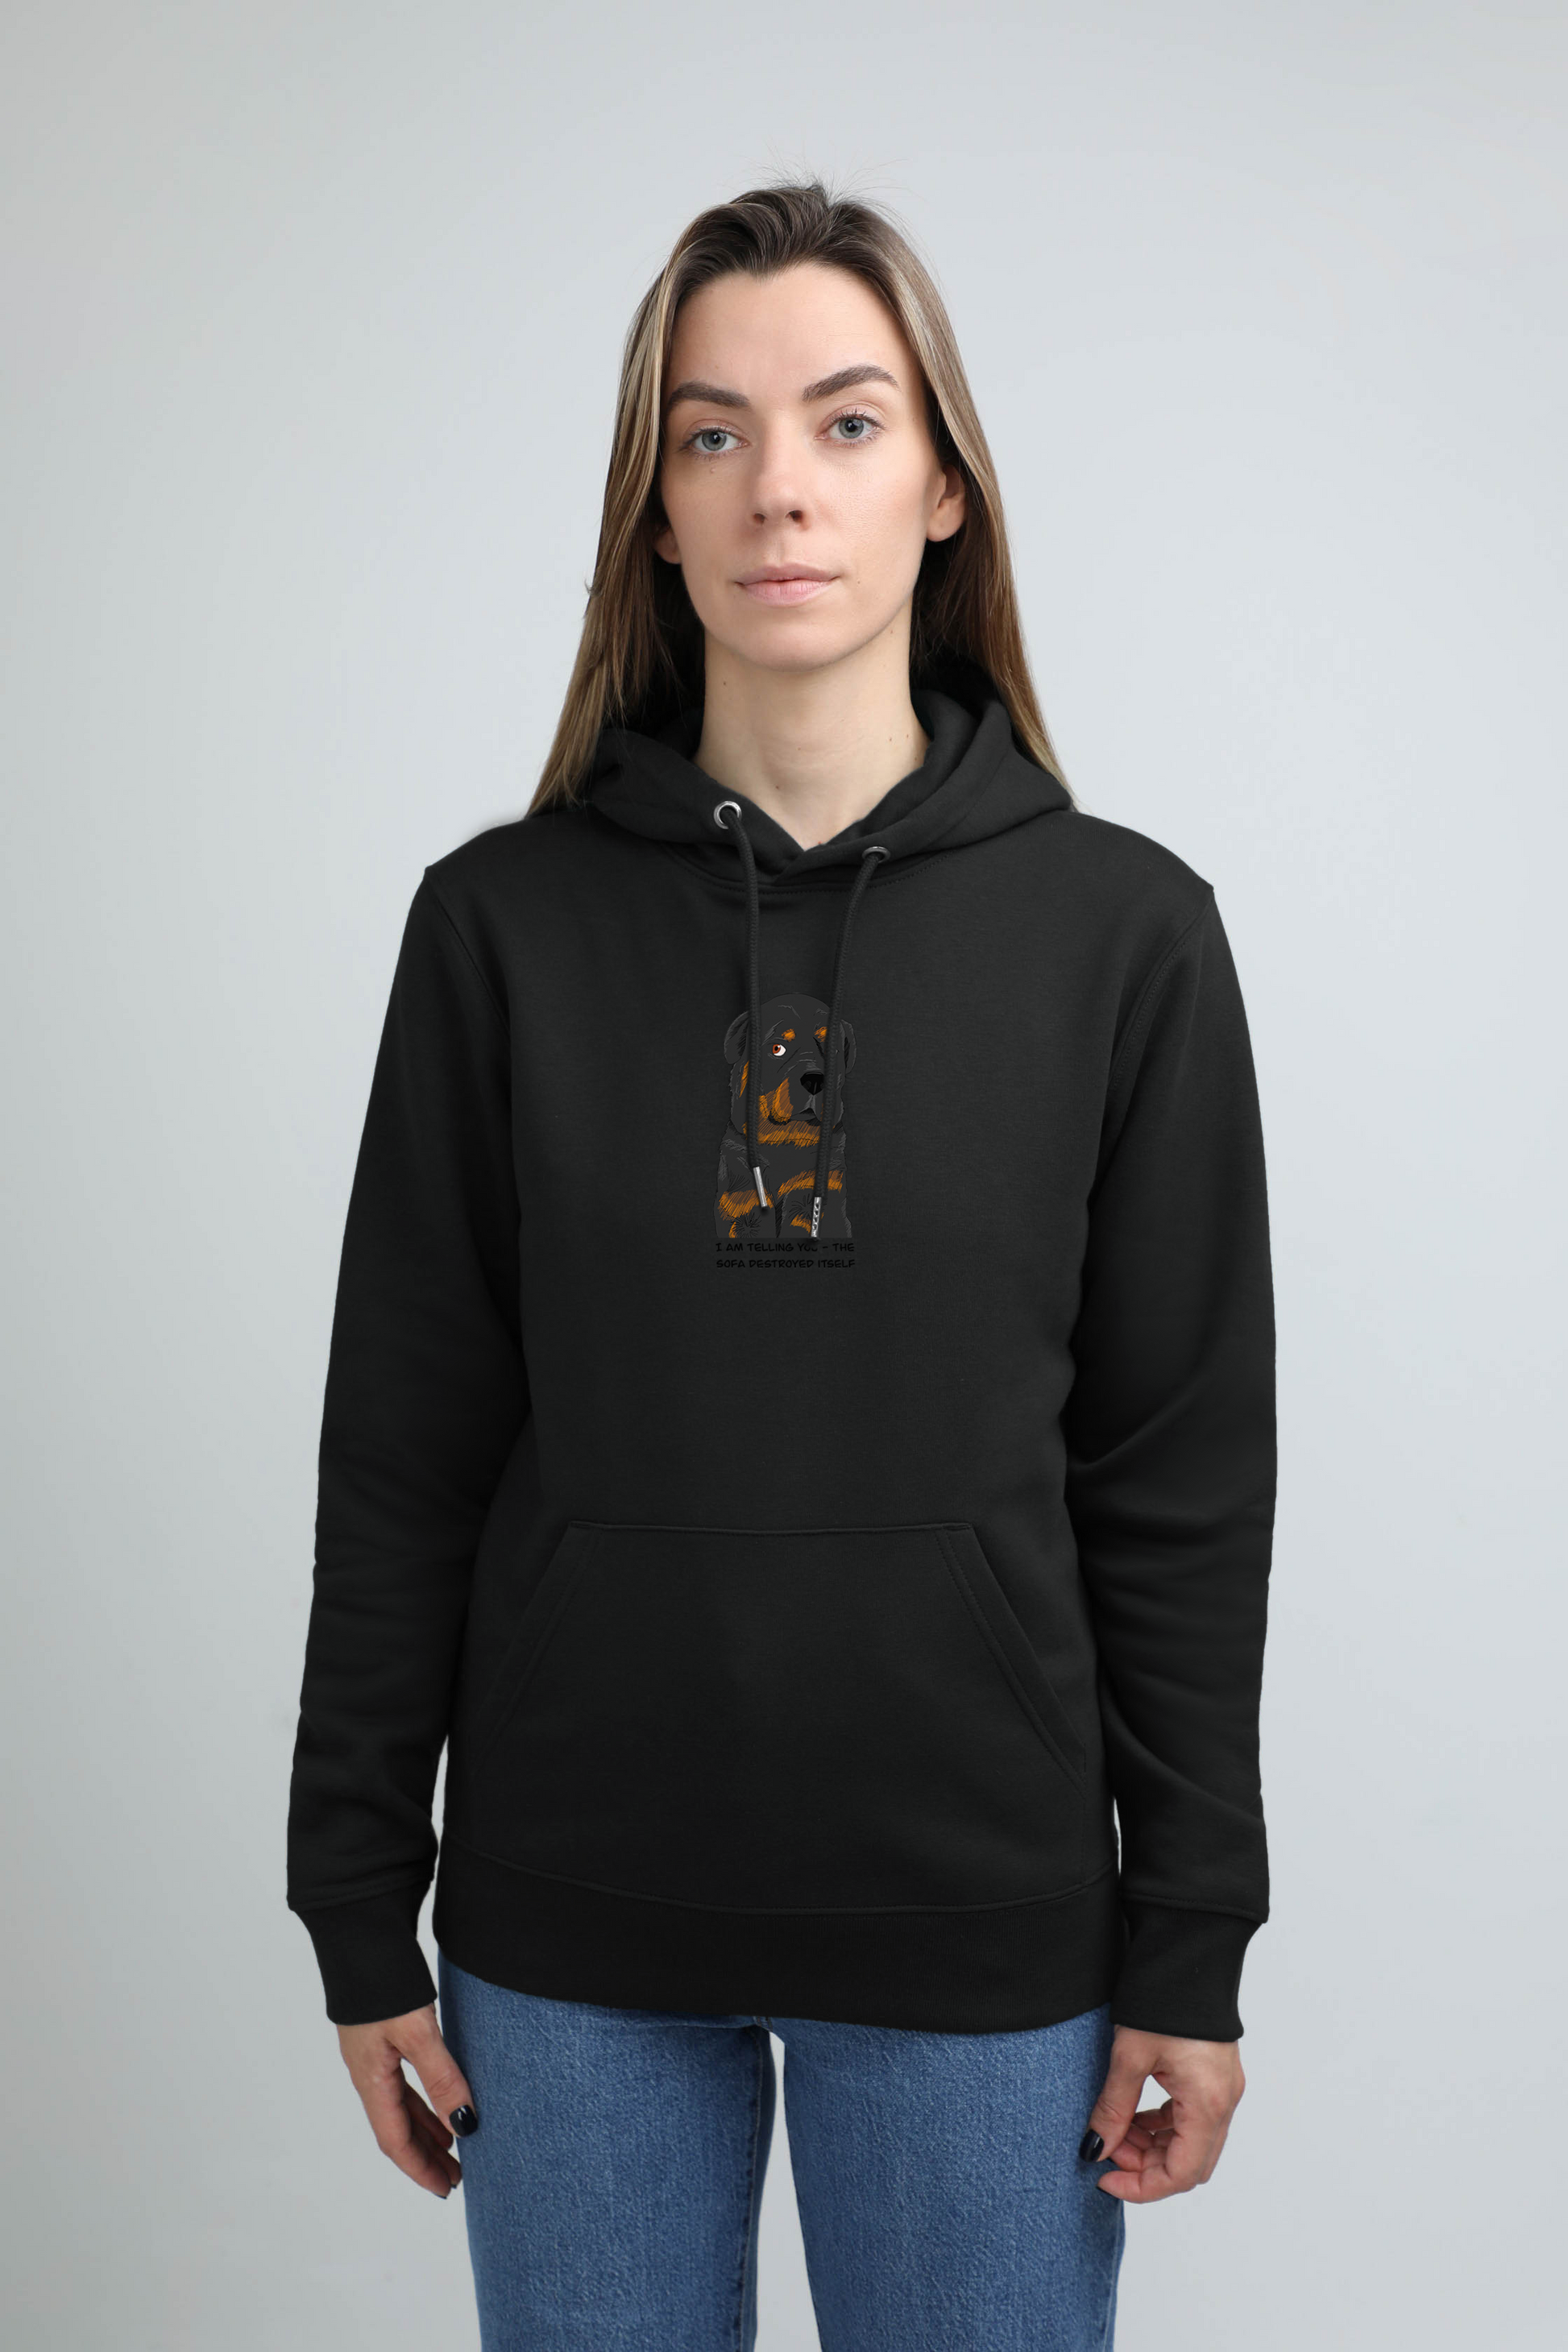 Sofa destroyer dog | Hoodie with dog. Regular fit | Unisex by My Wild Other